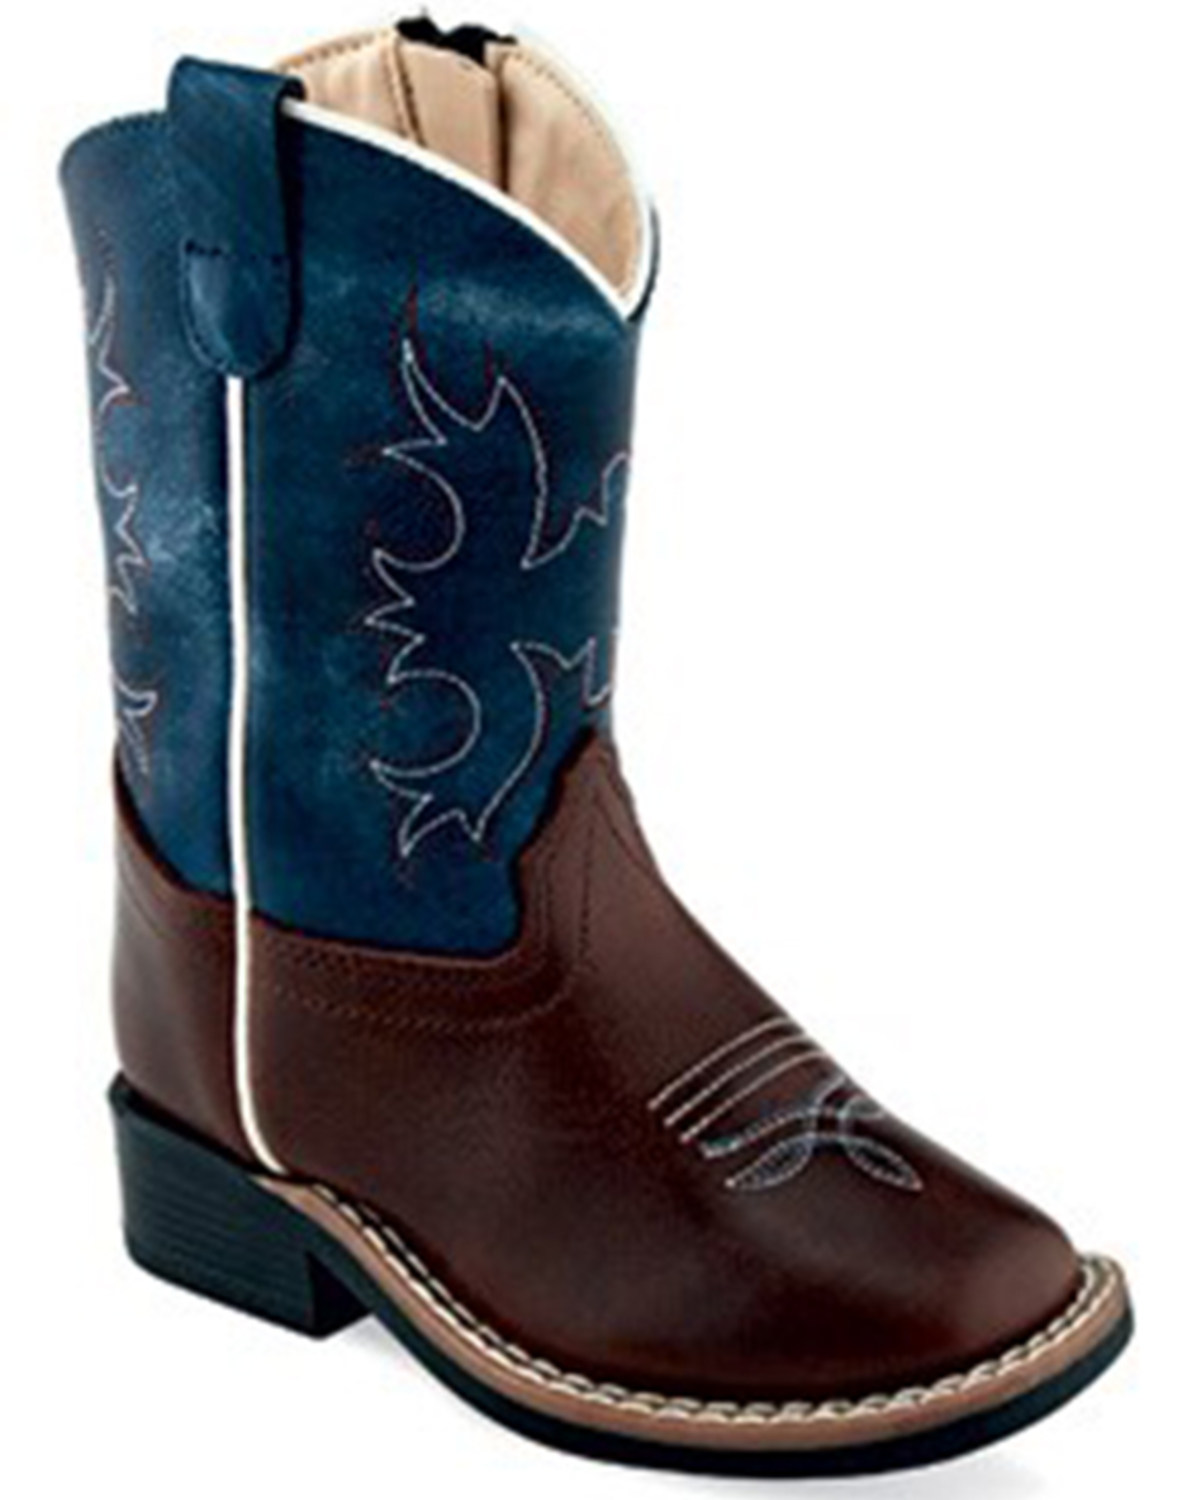 Old West Toddler Boys' Wipe Out Western Boots - Broad Square Toe